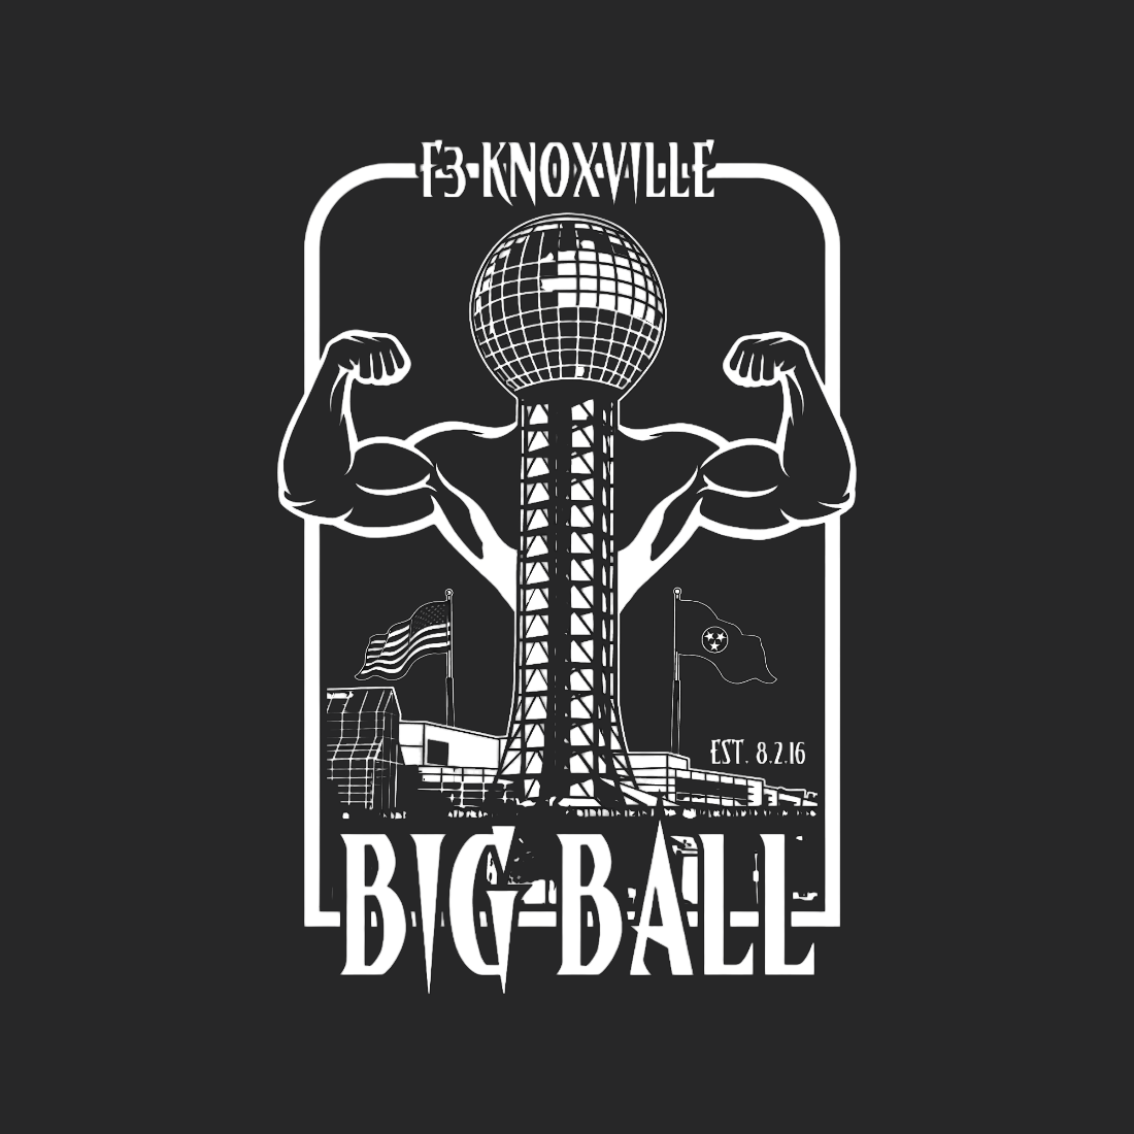 F3 Knoxville Big Ball Pre-Order August 2022